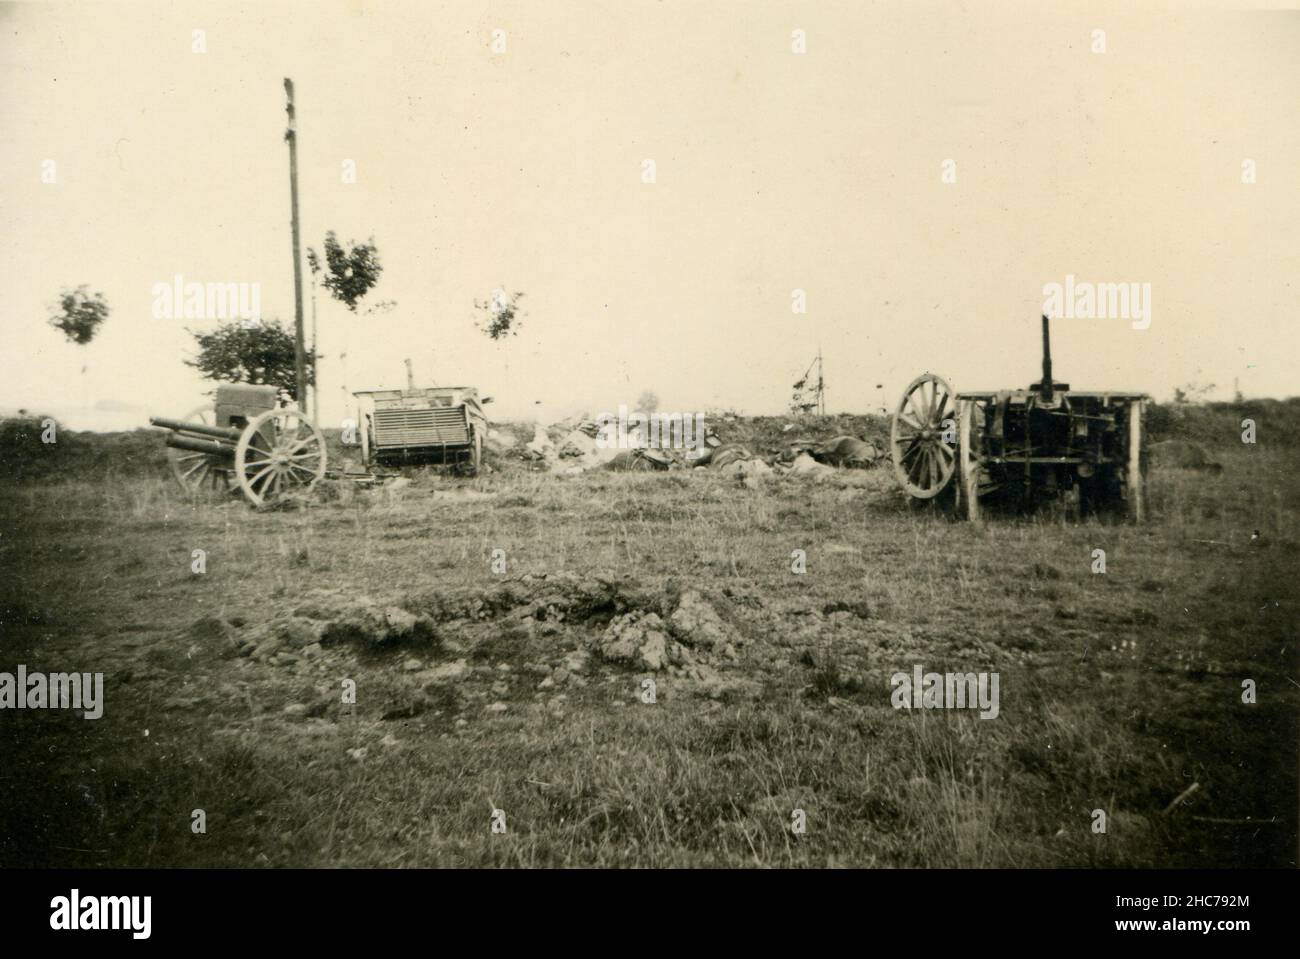 WWII WW2 german soldiers invades Poland - Tomaszów Lubelski, Poland 09/22/1939 - polish abandon weapons and cannons Stock Photo